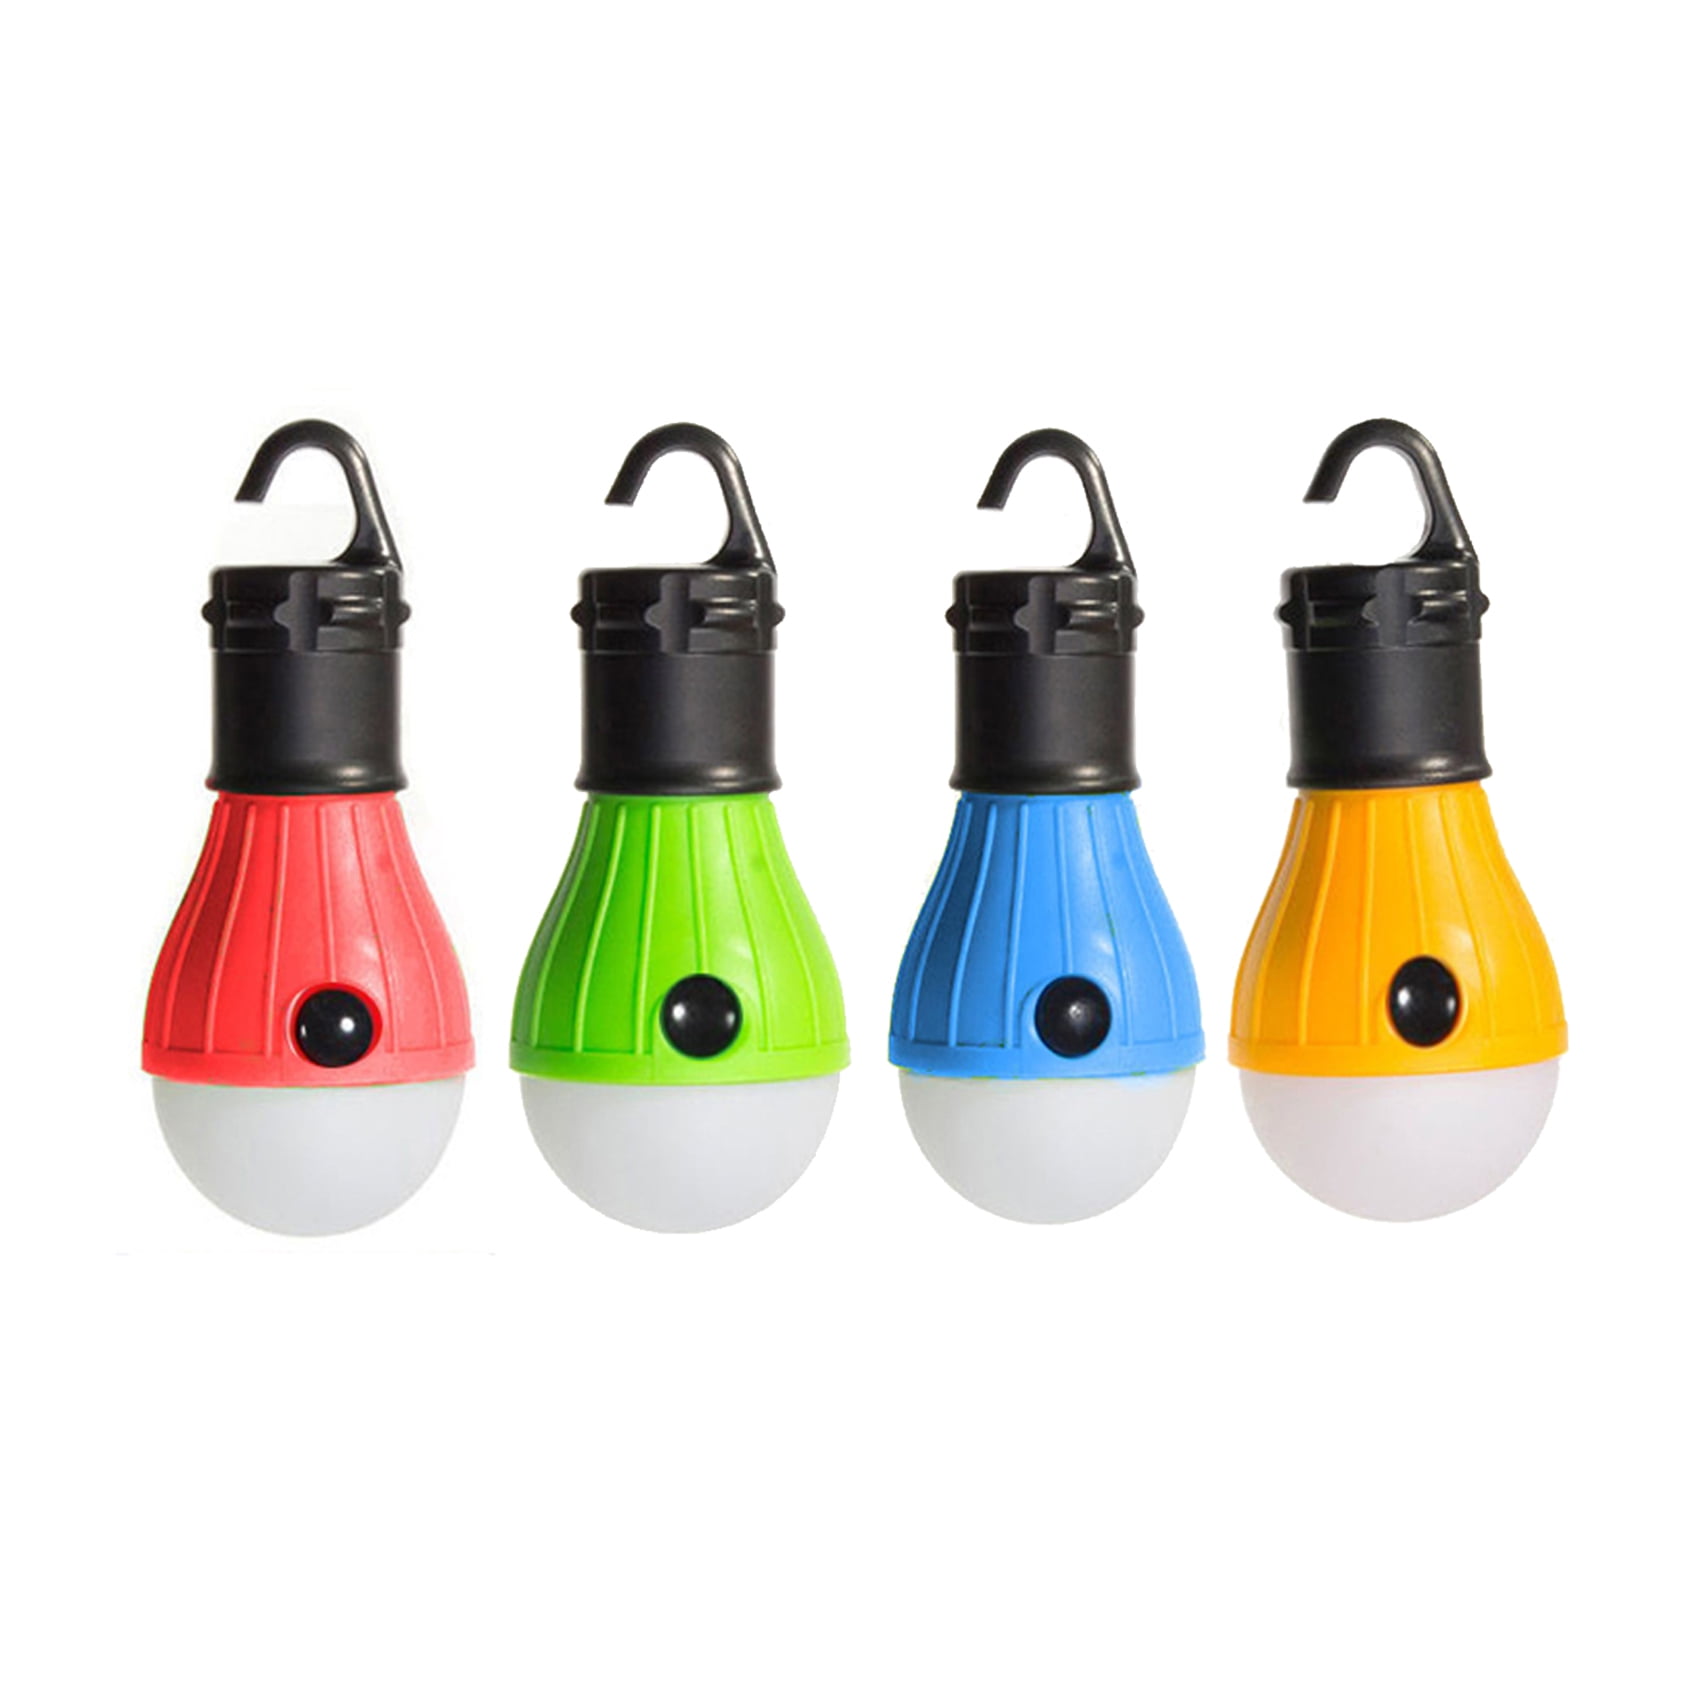 Details about  / New Lighting Hiking Hook Tent Emergency Lamps Camping Lights Outdoor 3 LED Bulb